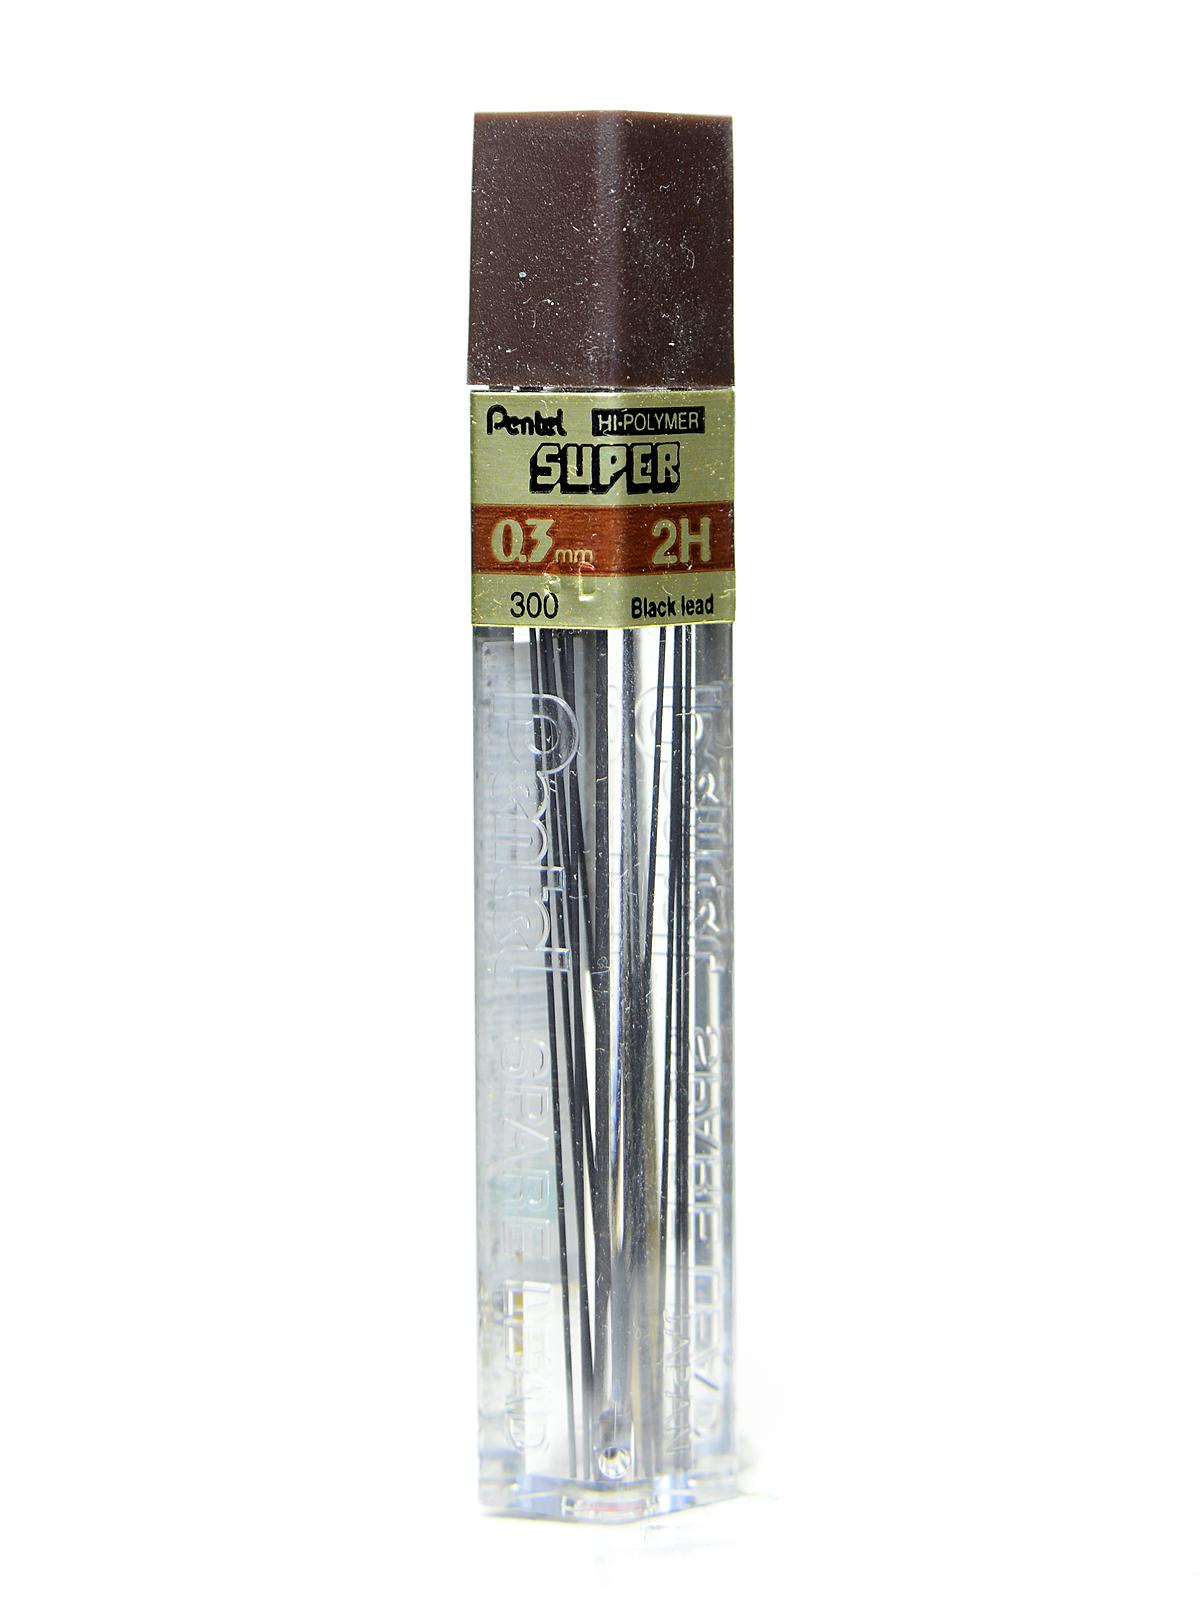 Super Hi-Polymer Refill Leads 2H 0.3 Mm Tube Of 12